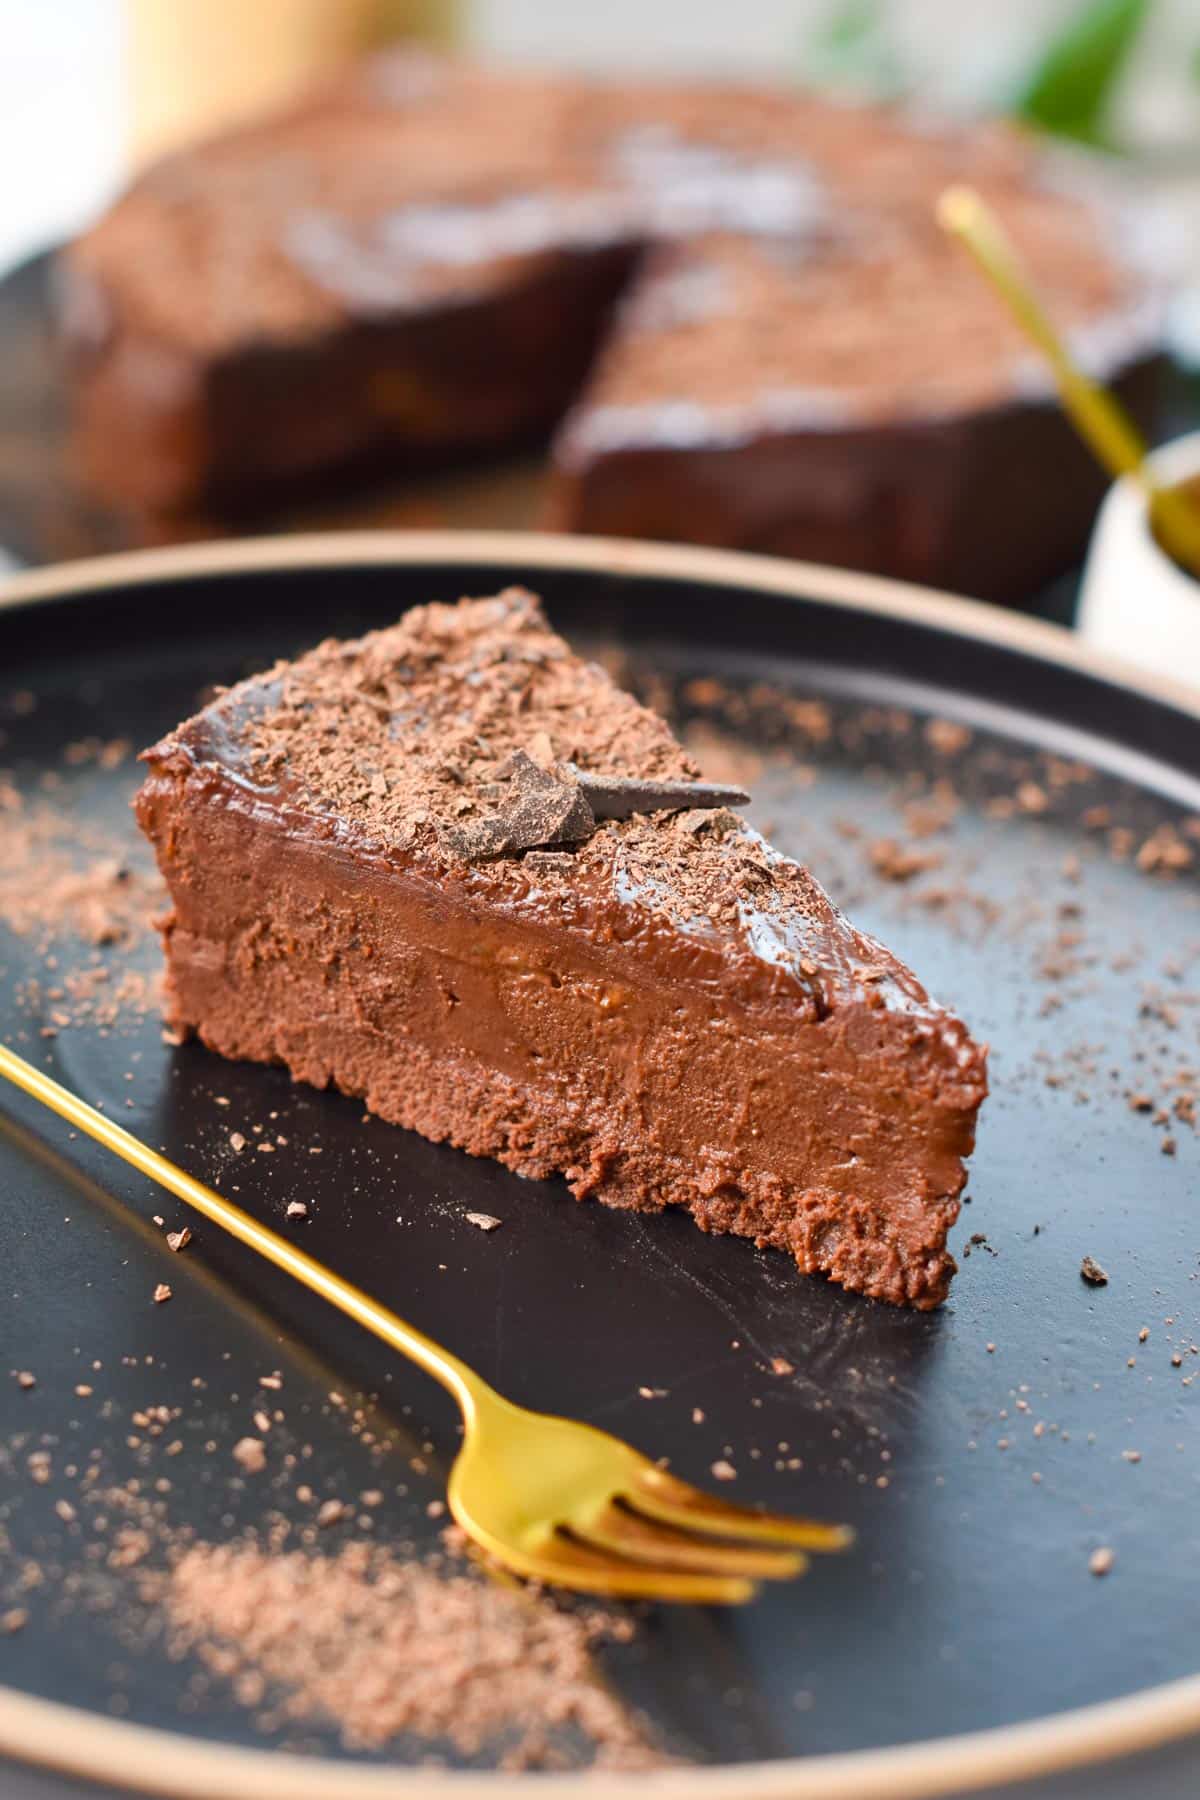 A slice of No-Bake Chocolate Cake on a black plate, with a golden fork on the side.